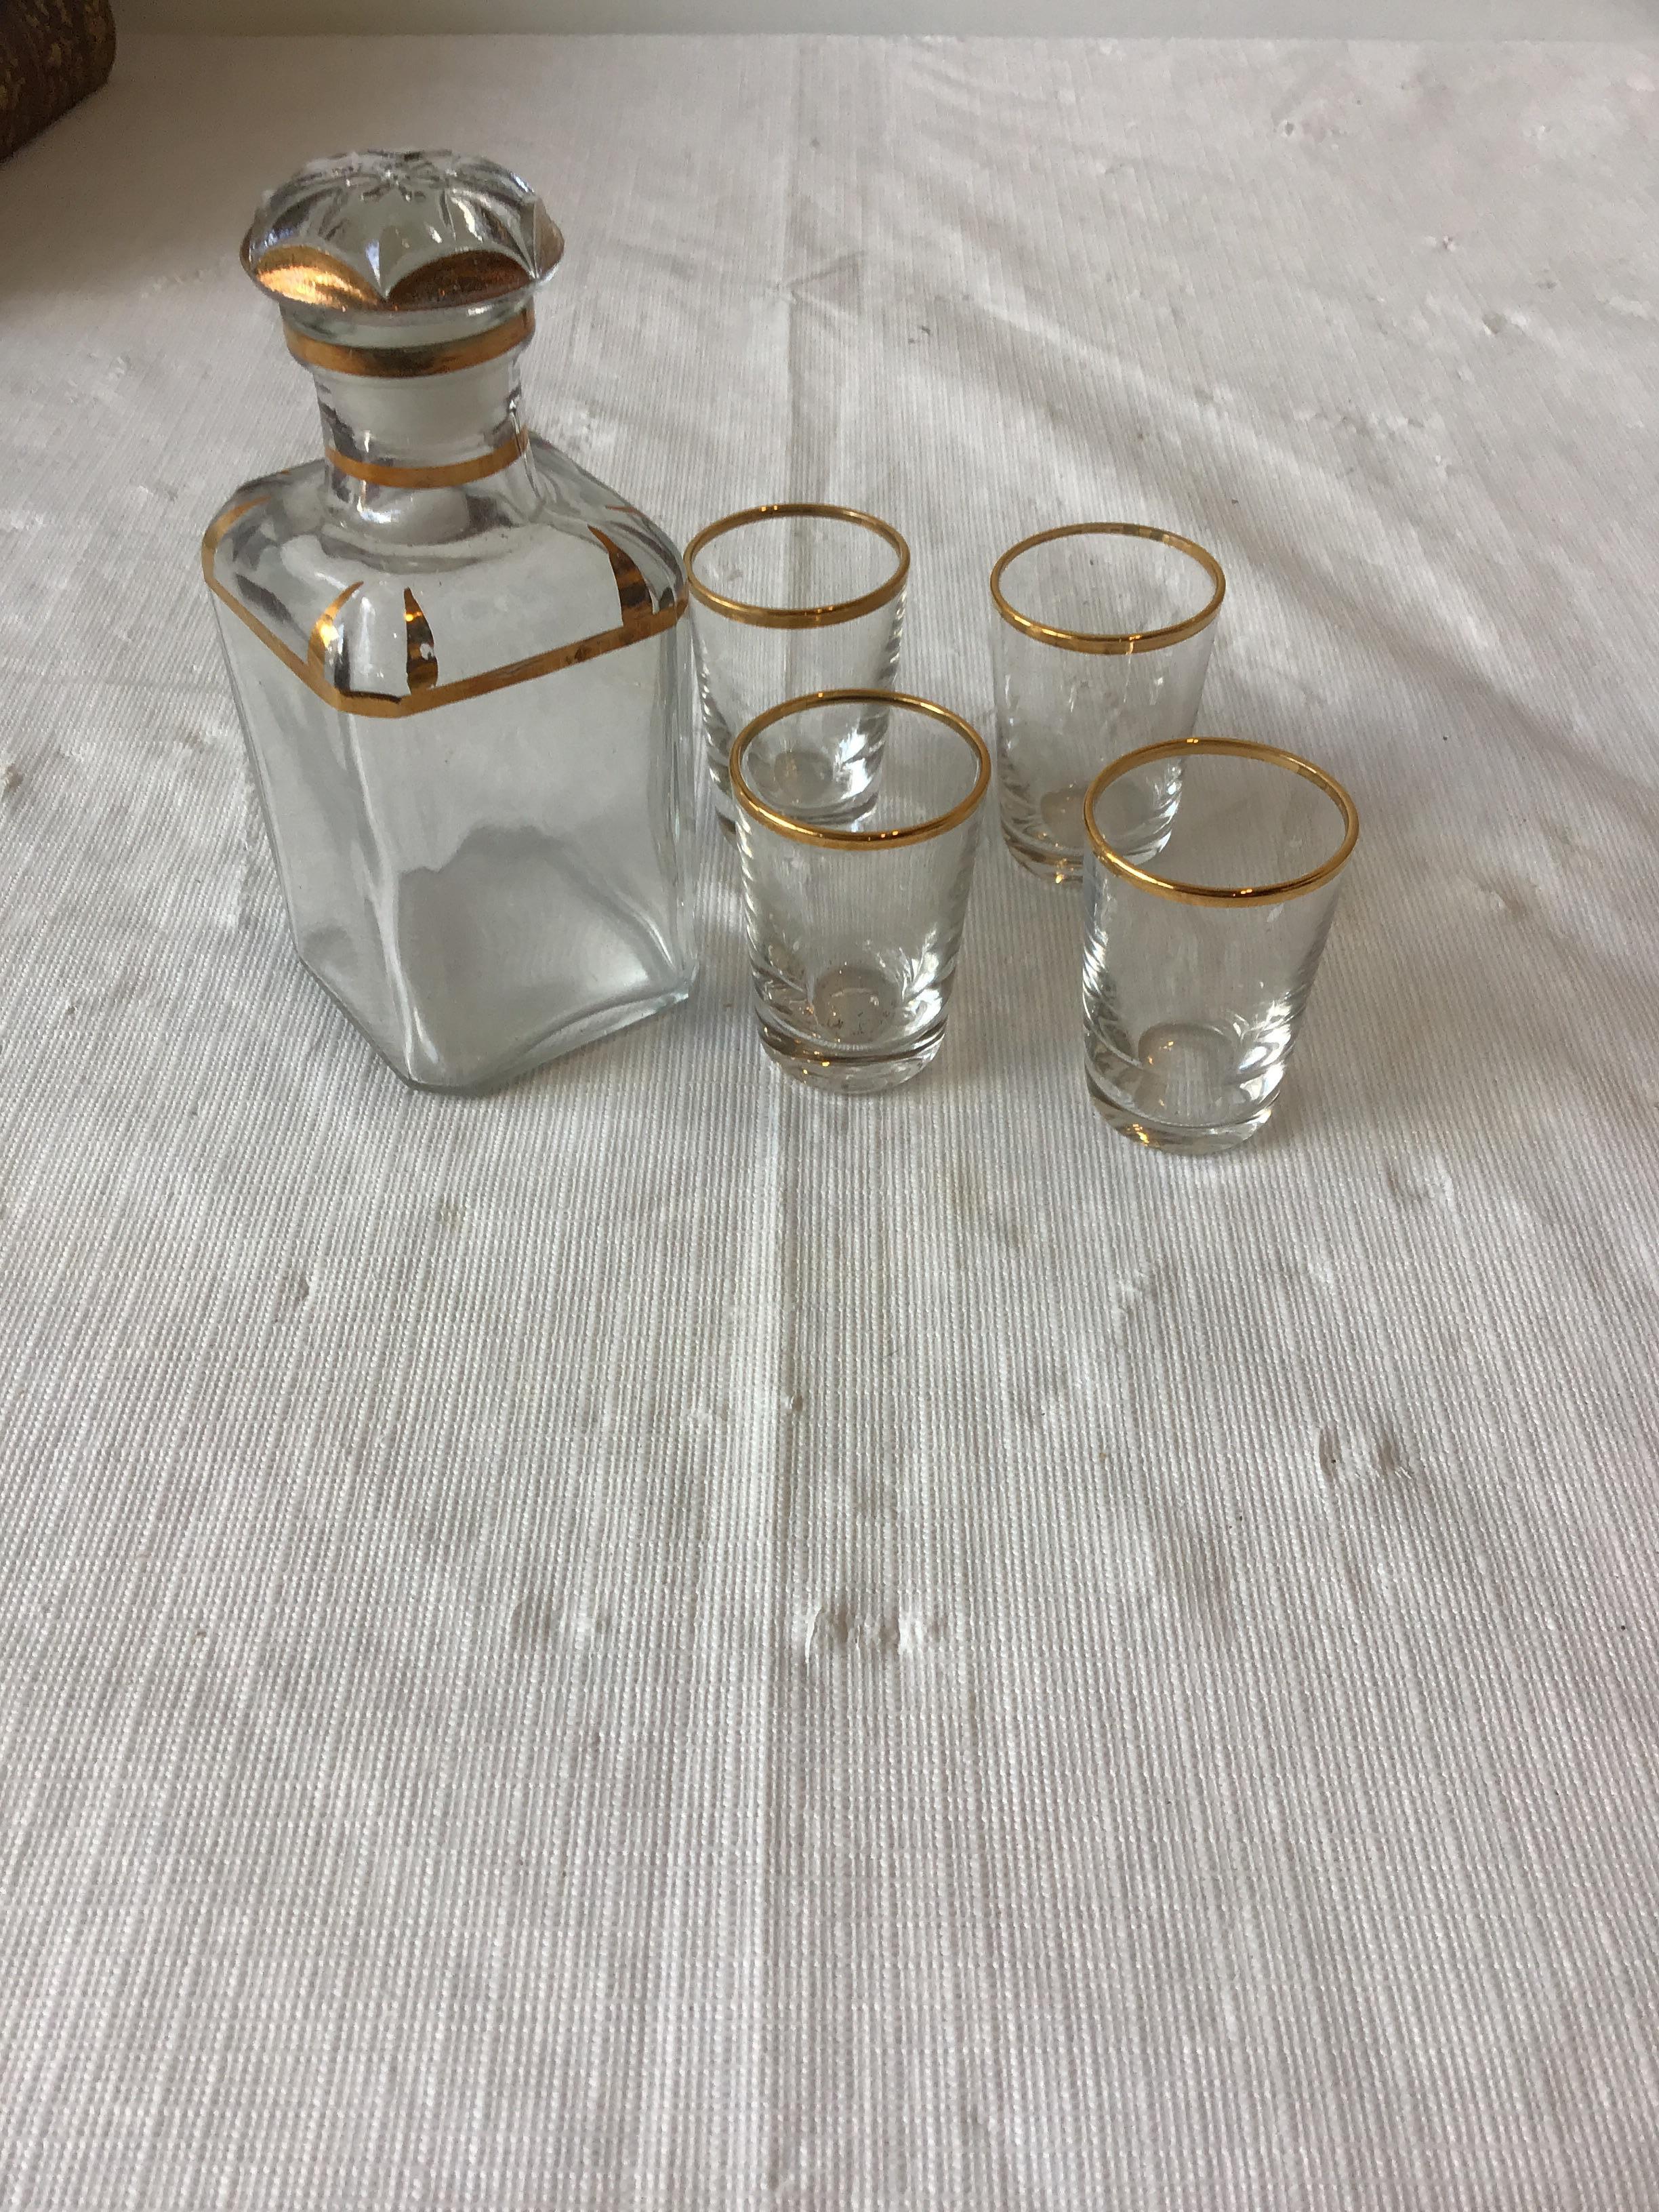 1950s French Cordial Set in a Book Box 4